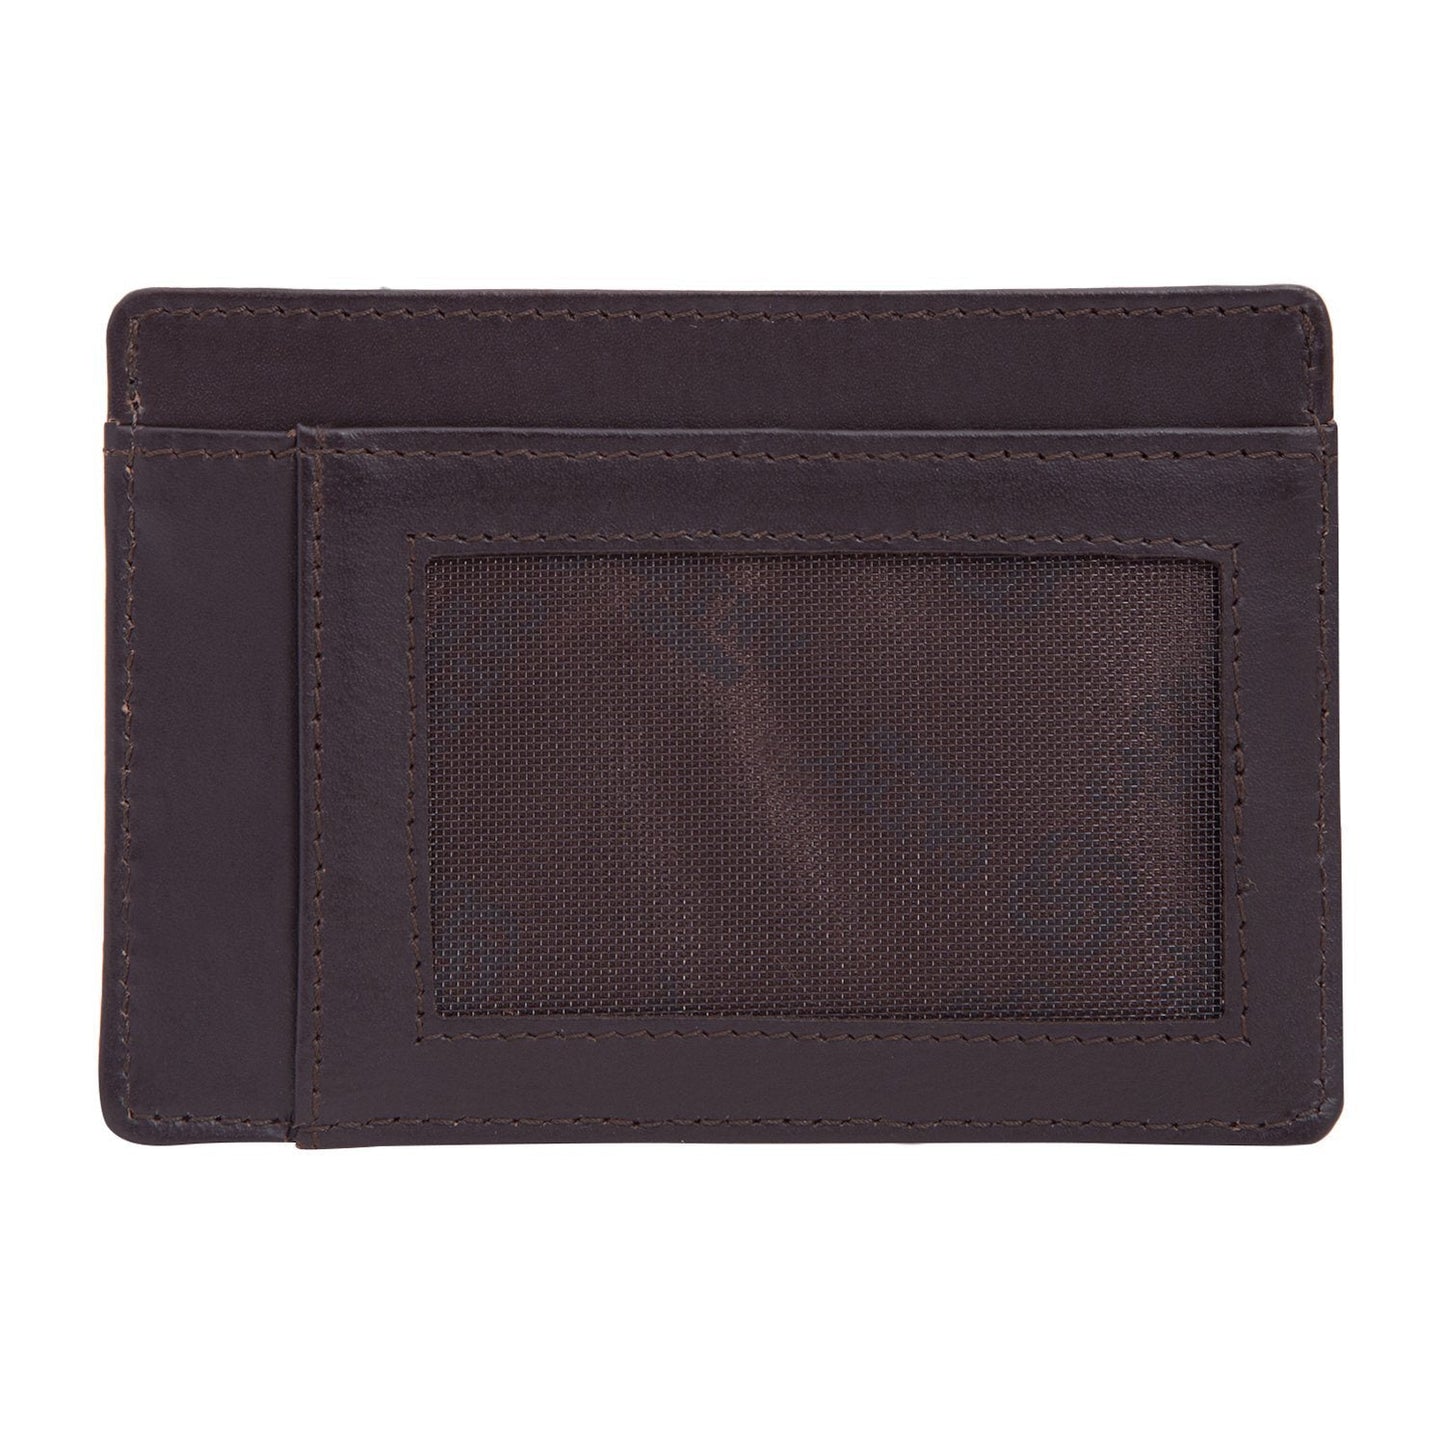 Coffee Colour Italian Leather Slim Wallet/Card Holder (5 Card Slot + 1 ID Slot + Cash Compartment) Cathy London 